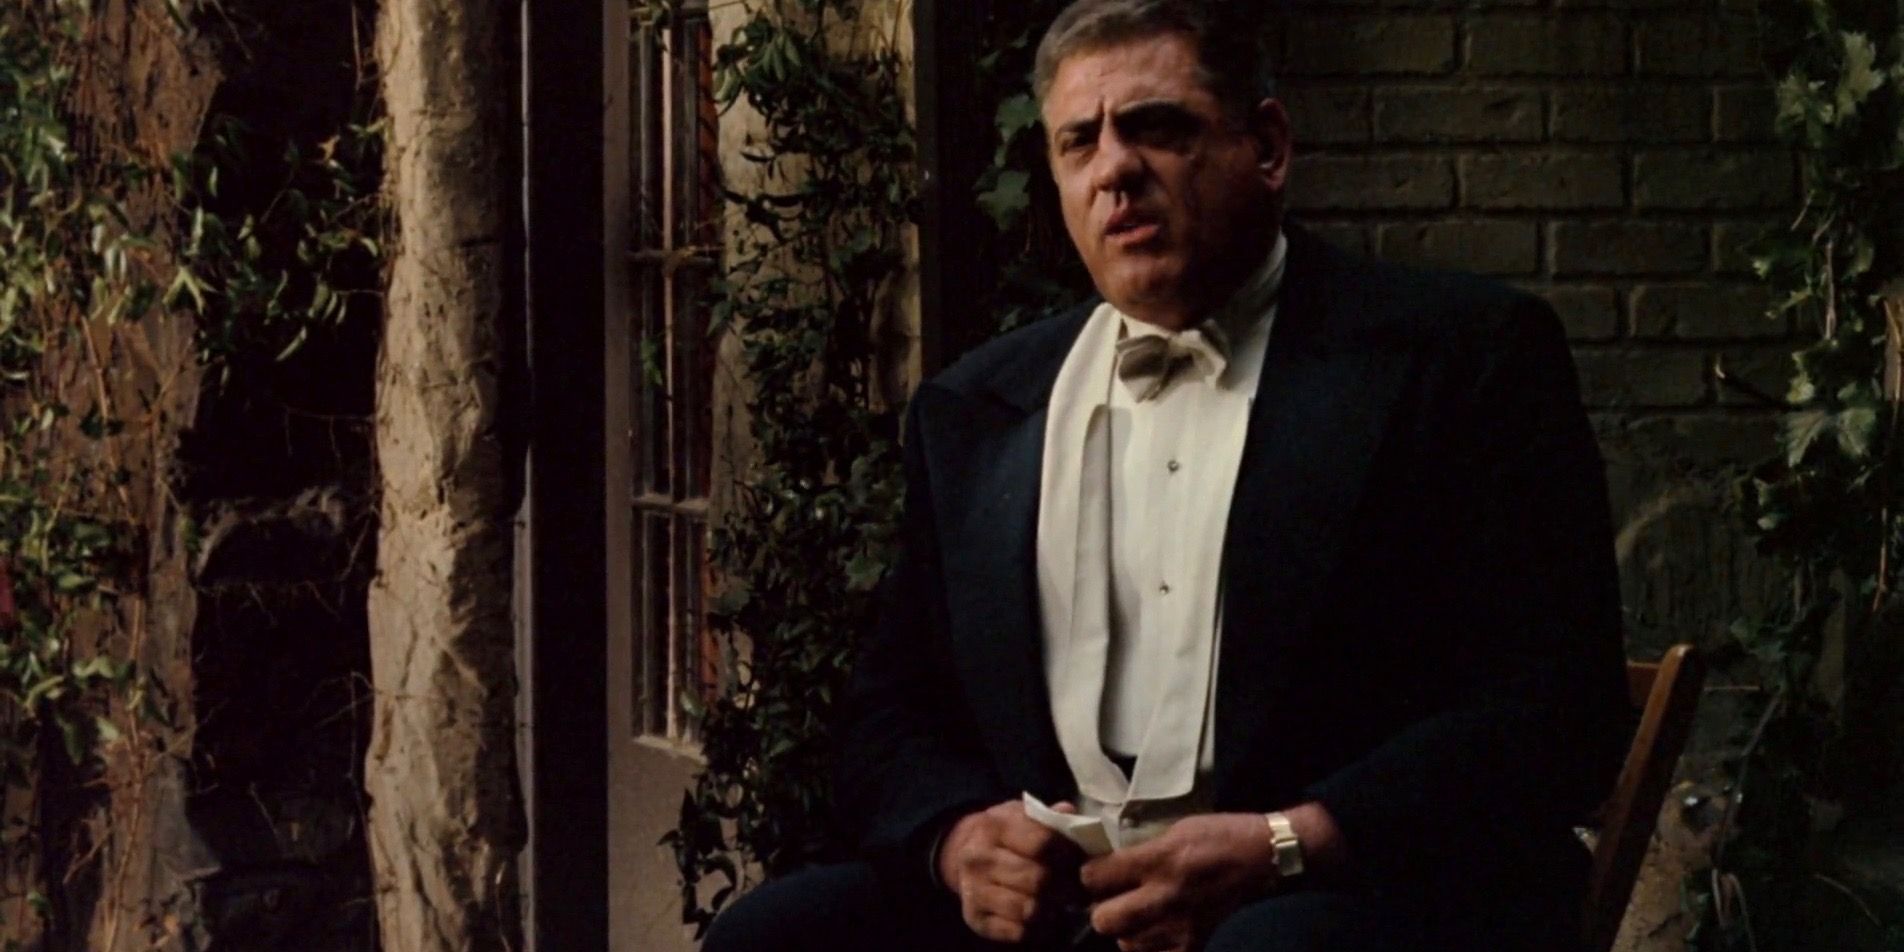 Luca Brasi practices his speech in The Godfather